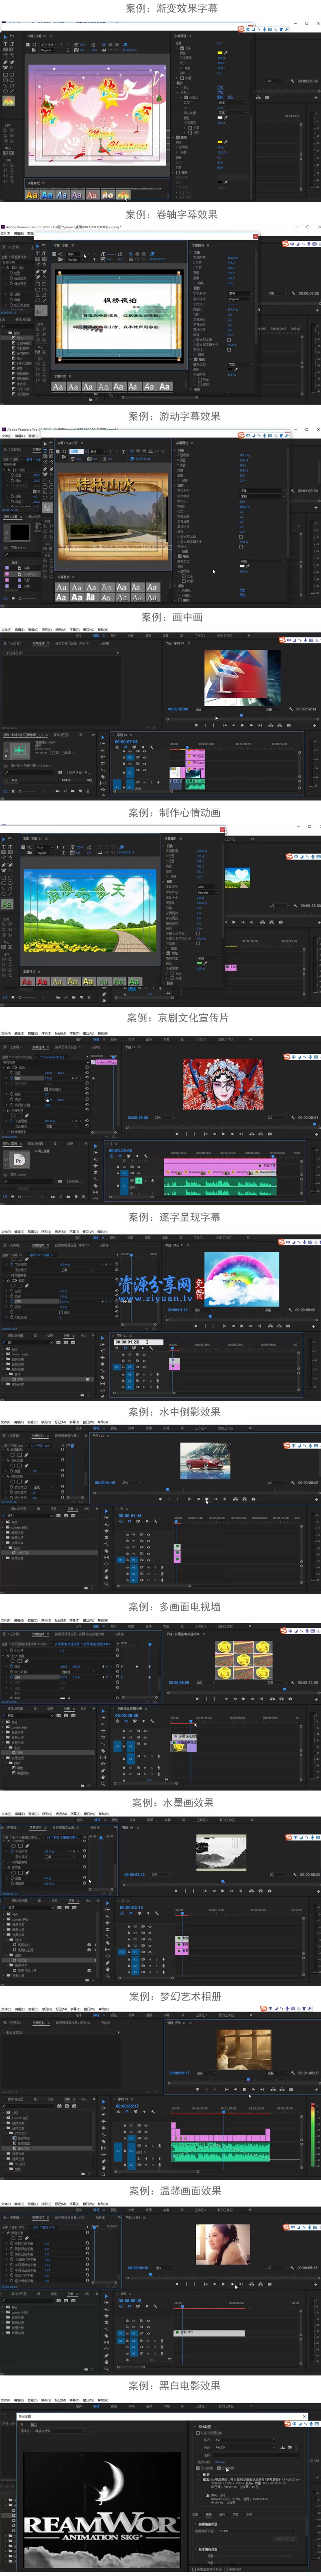 After Effects AE 视频教程大集合